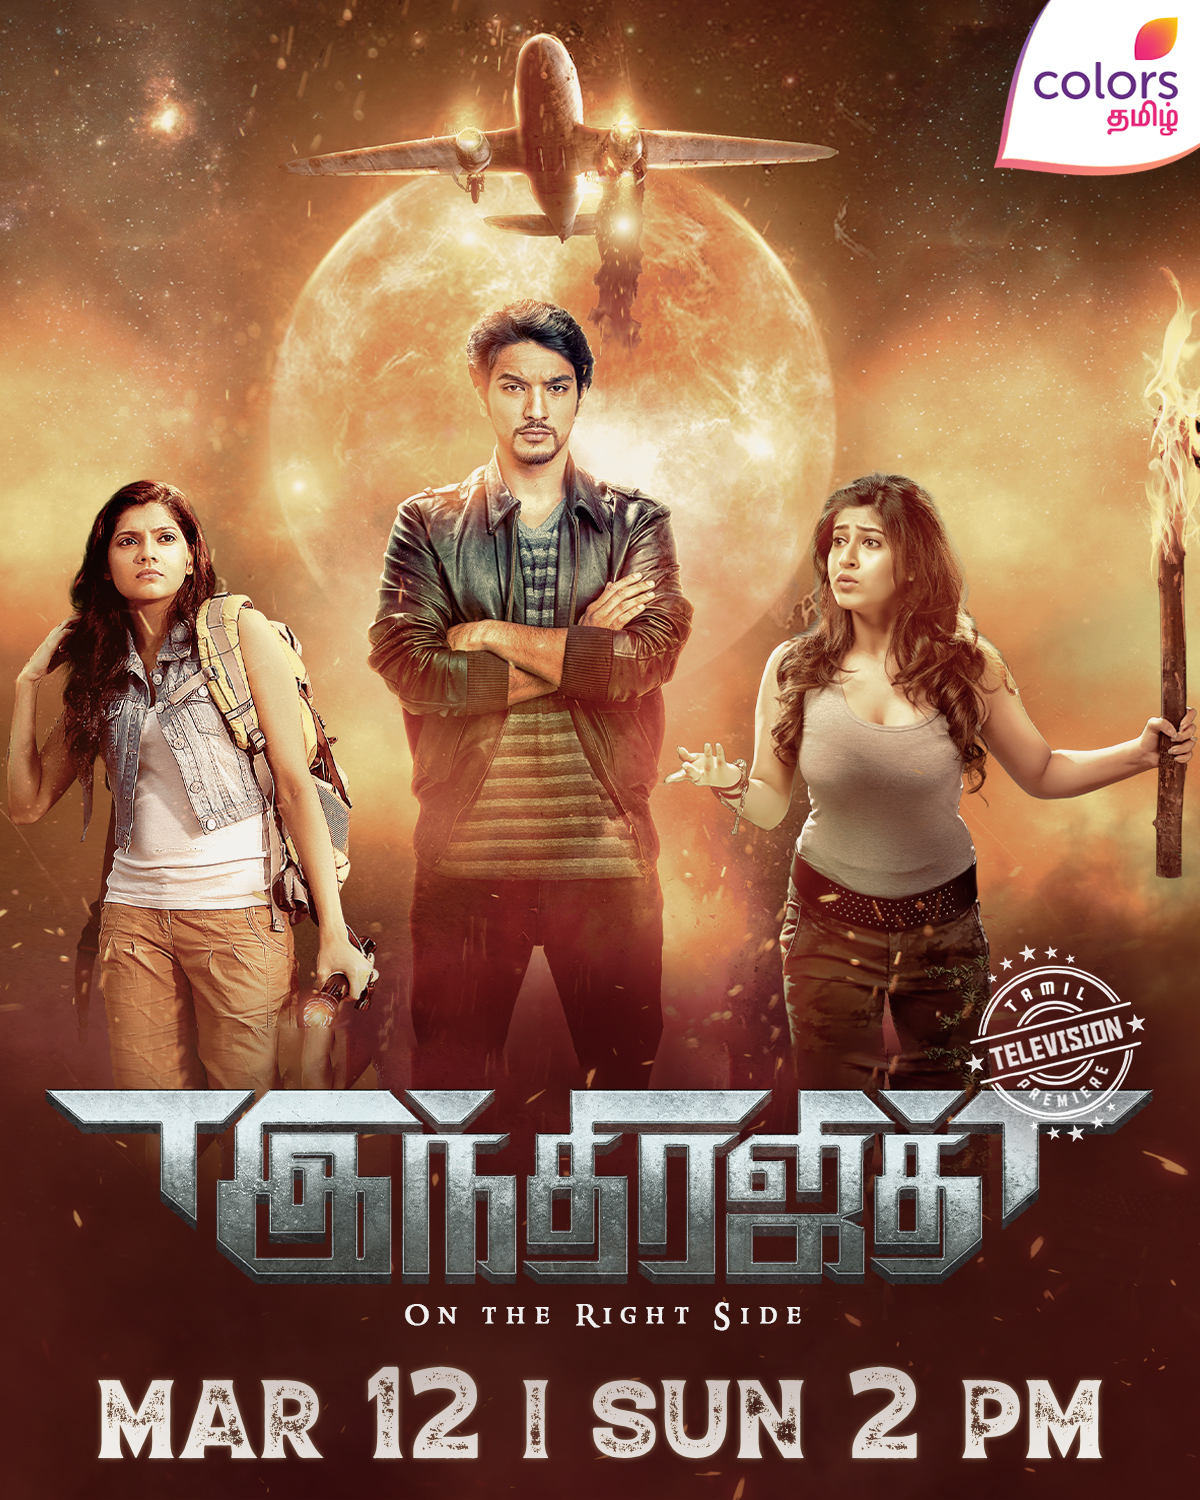 Colors Tamil presents the World Television Premiere of action-adventure INDRAJITH starring Gautham Karthick this Sunday